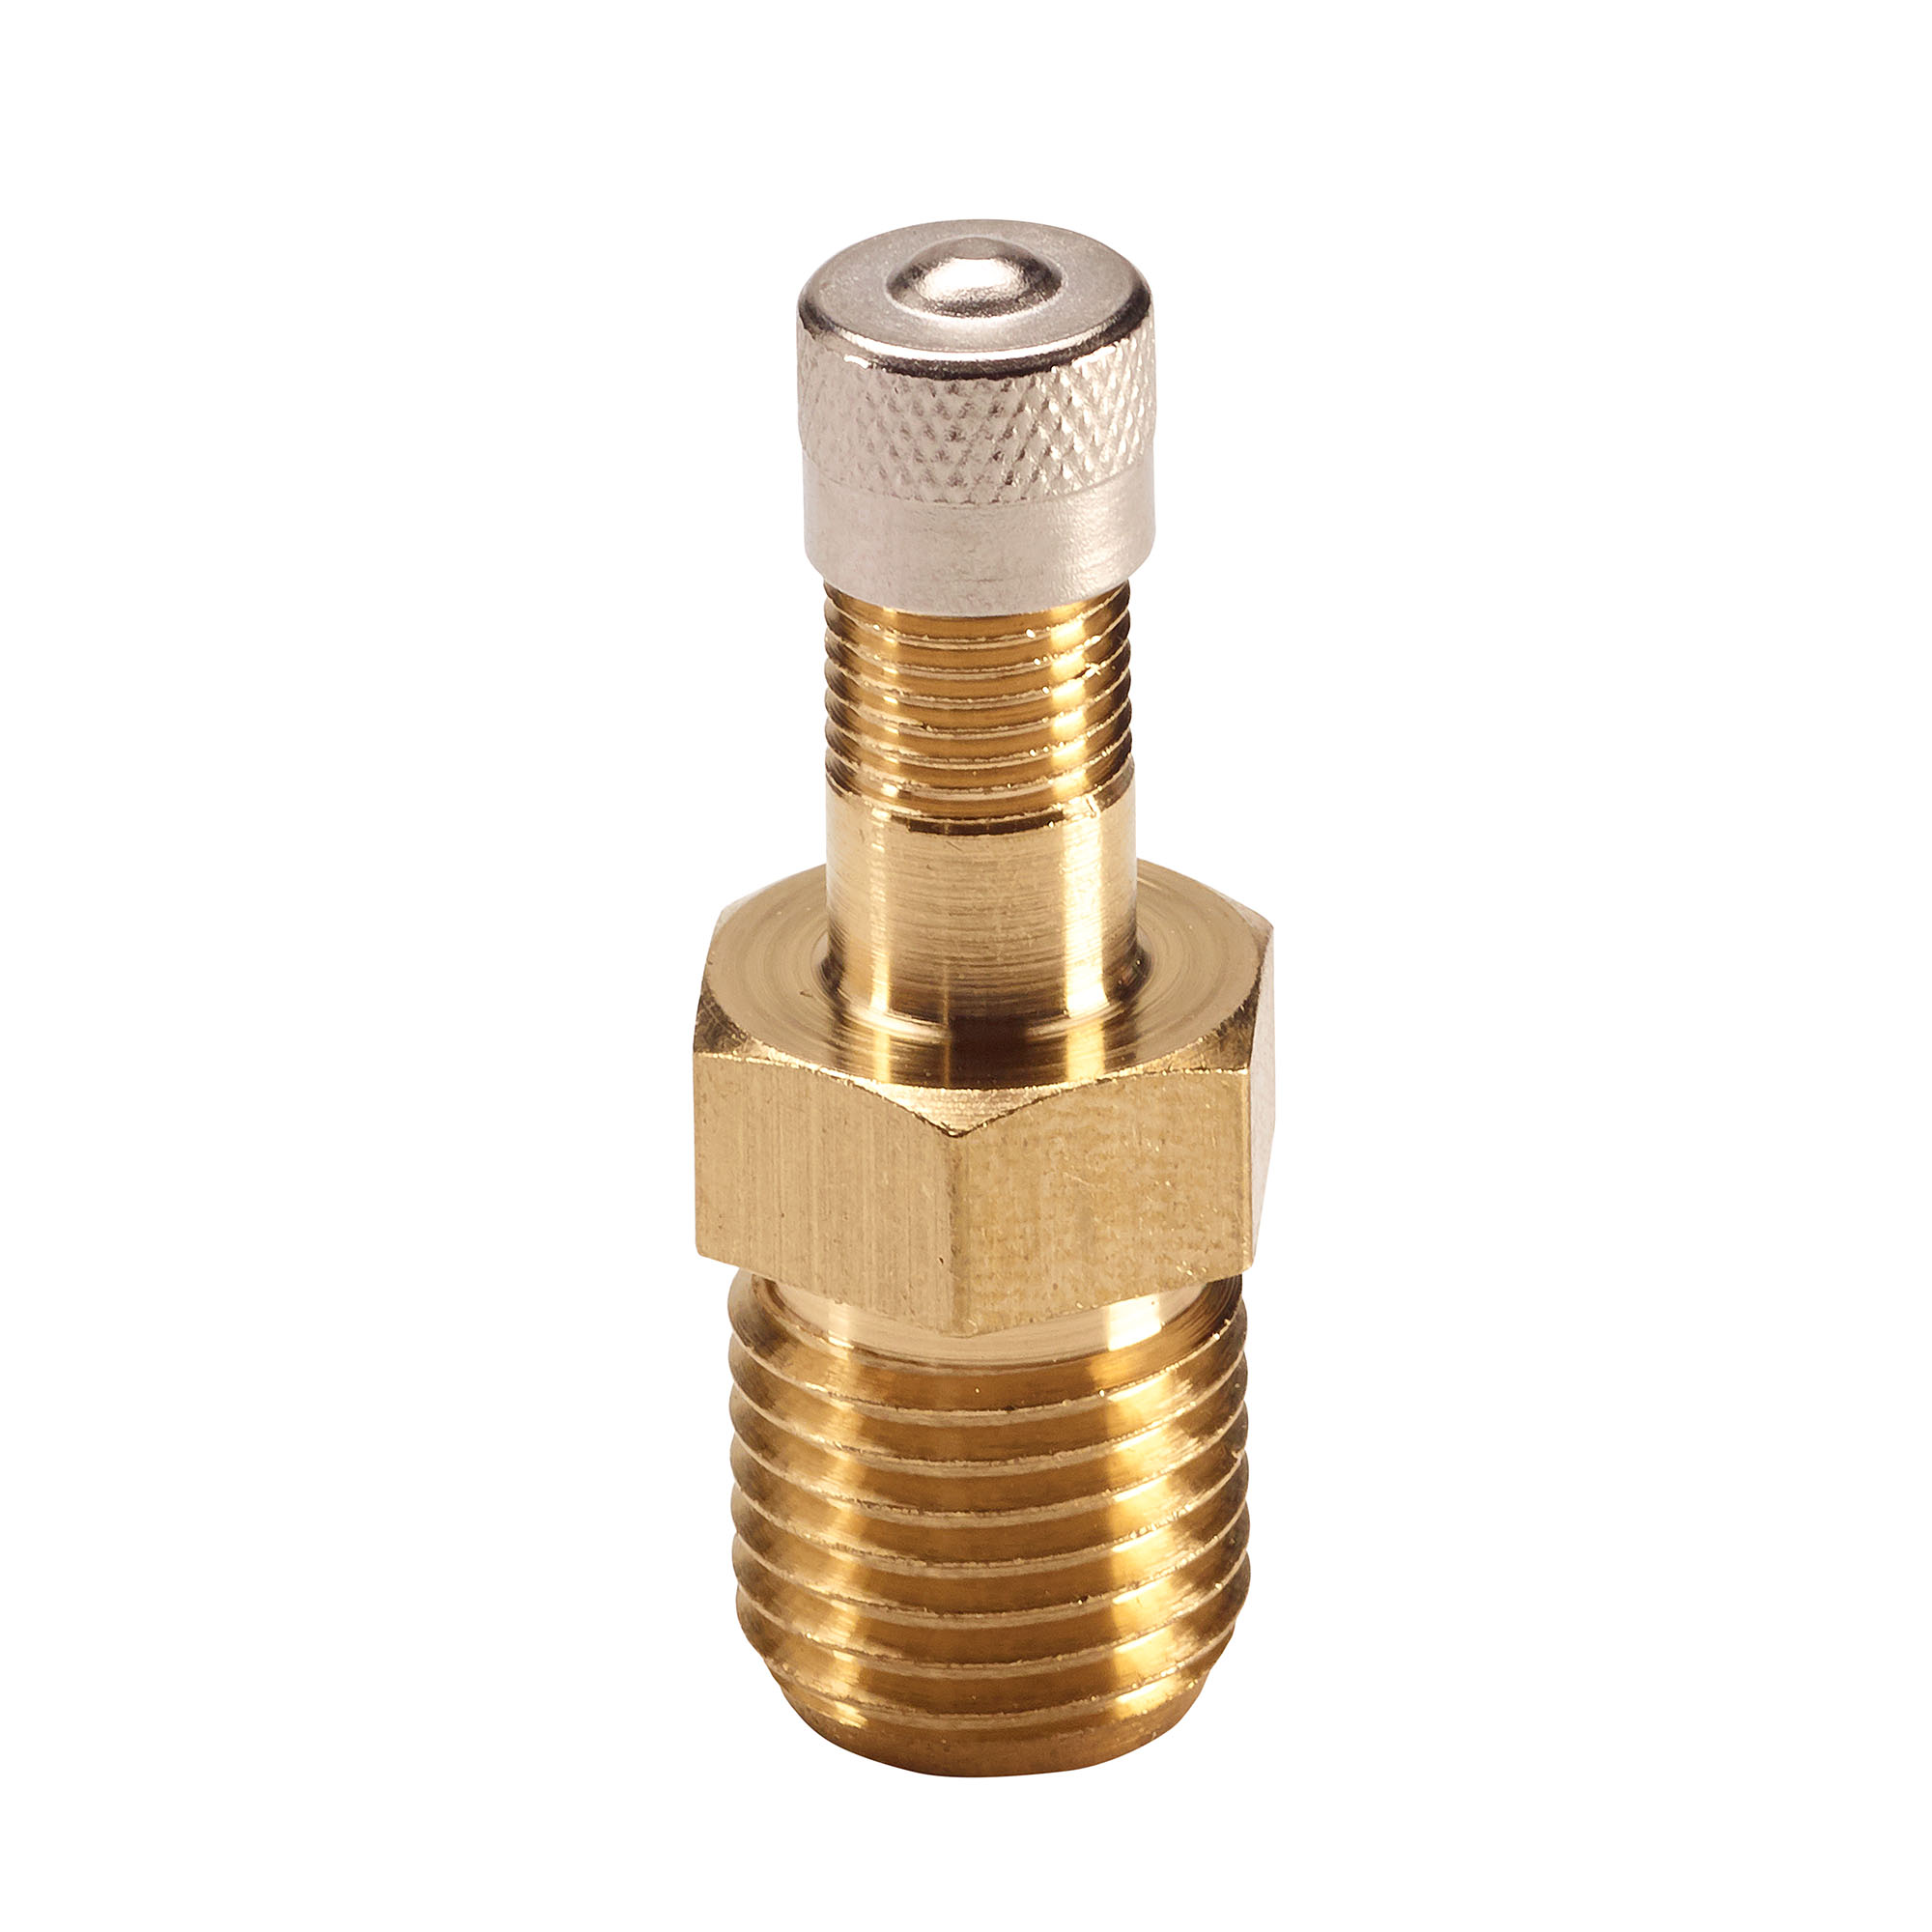 Threaded connection - Screw-in valve, G1/4”